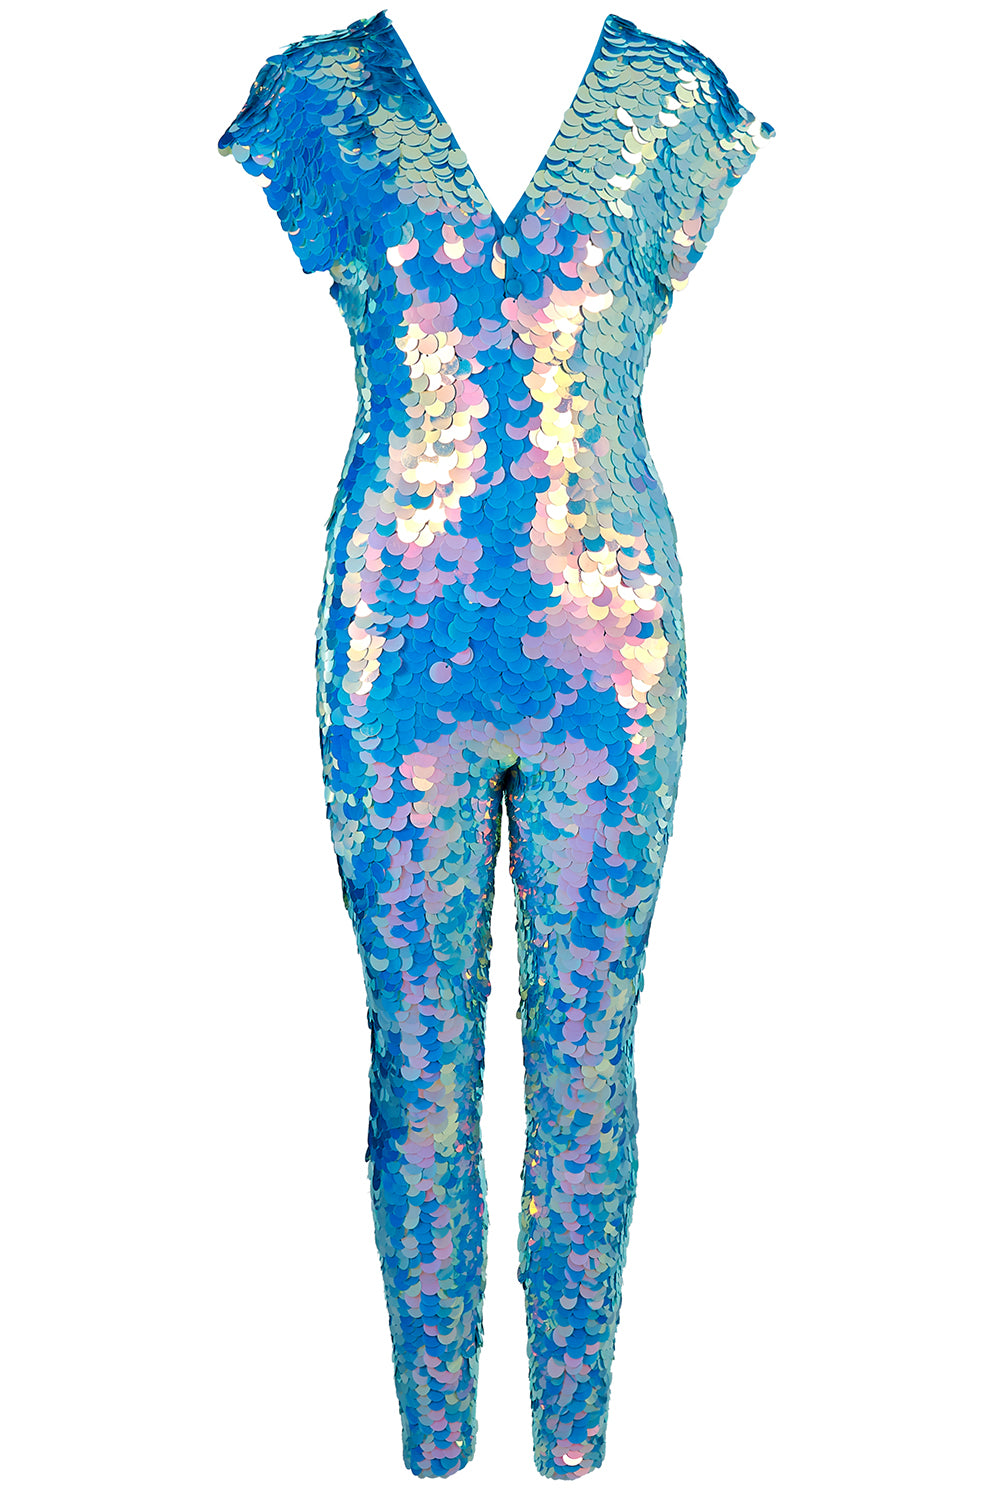 Jumpsuit covered in large round iridescent blue sequins